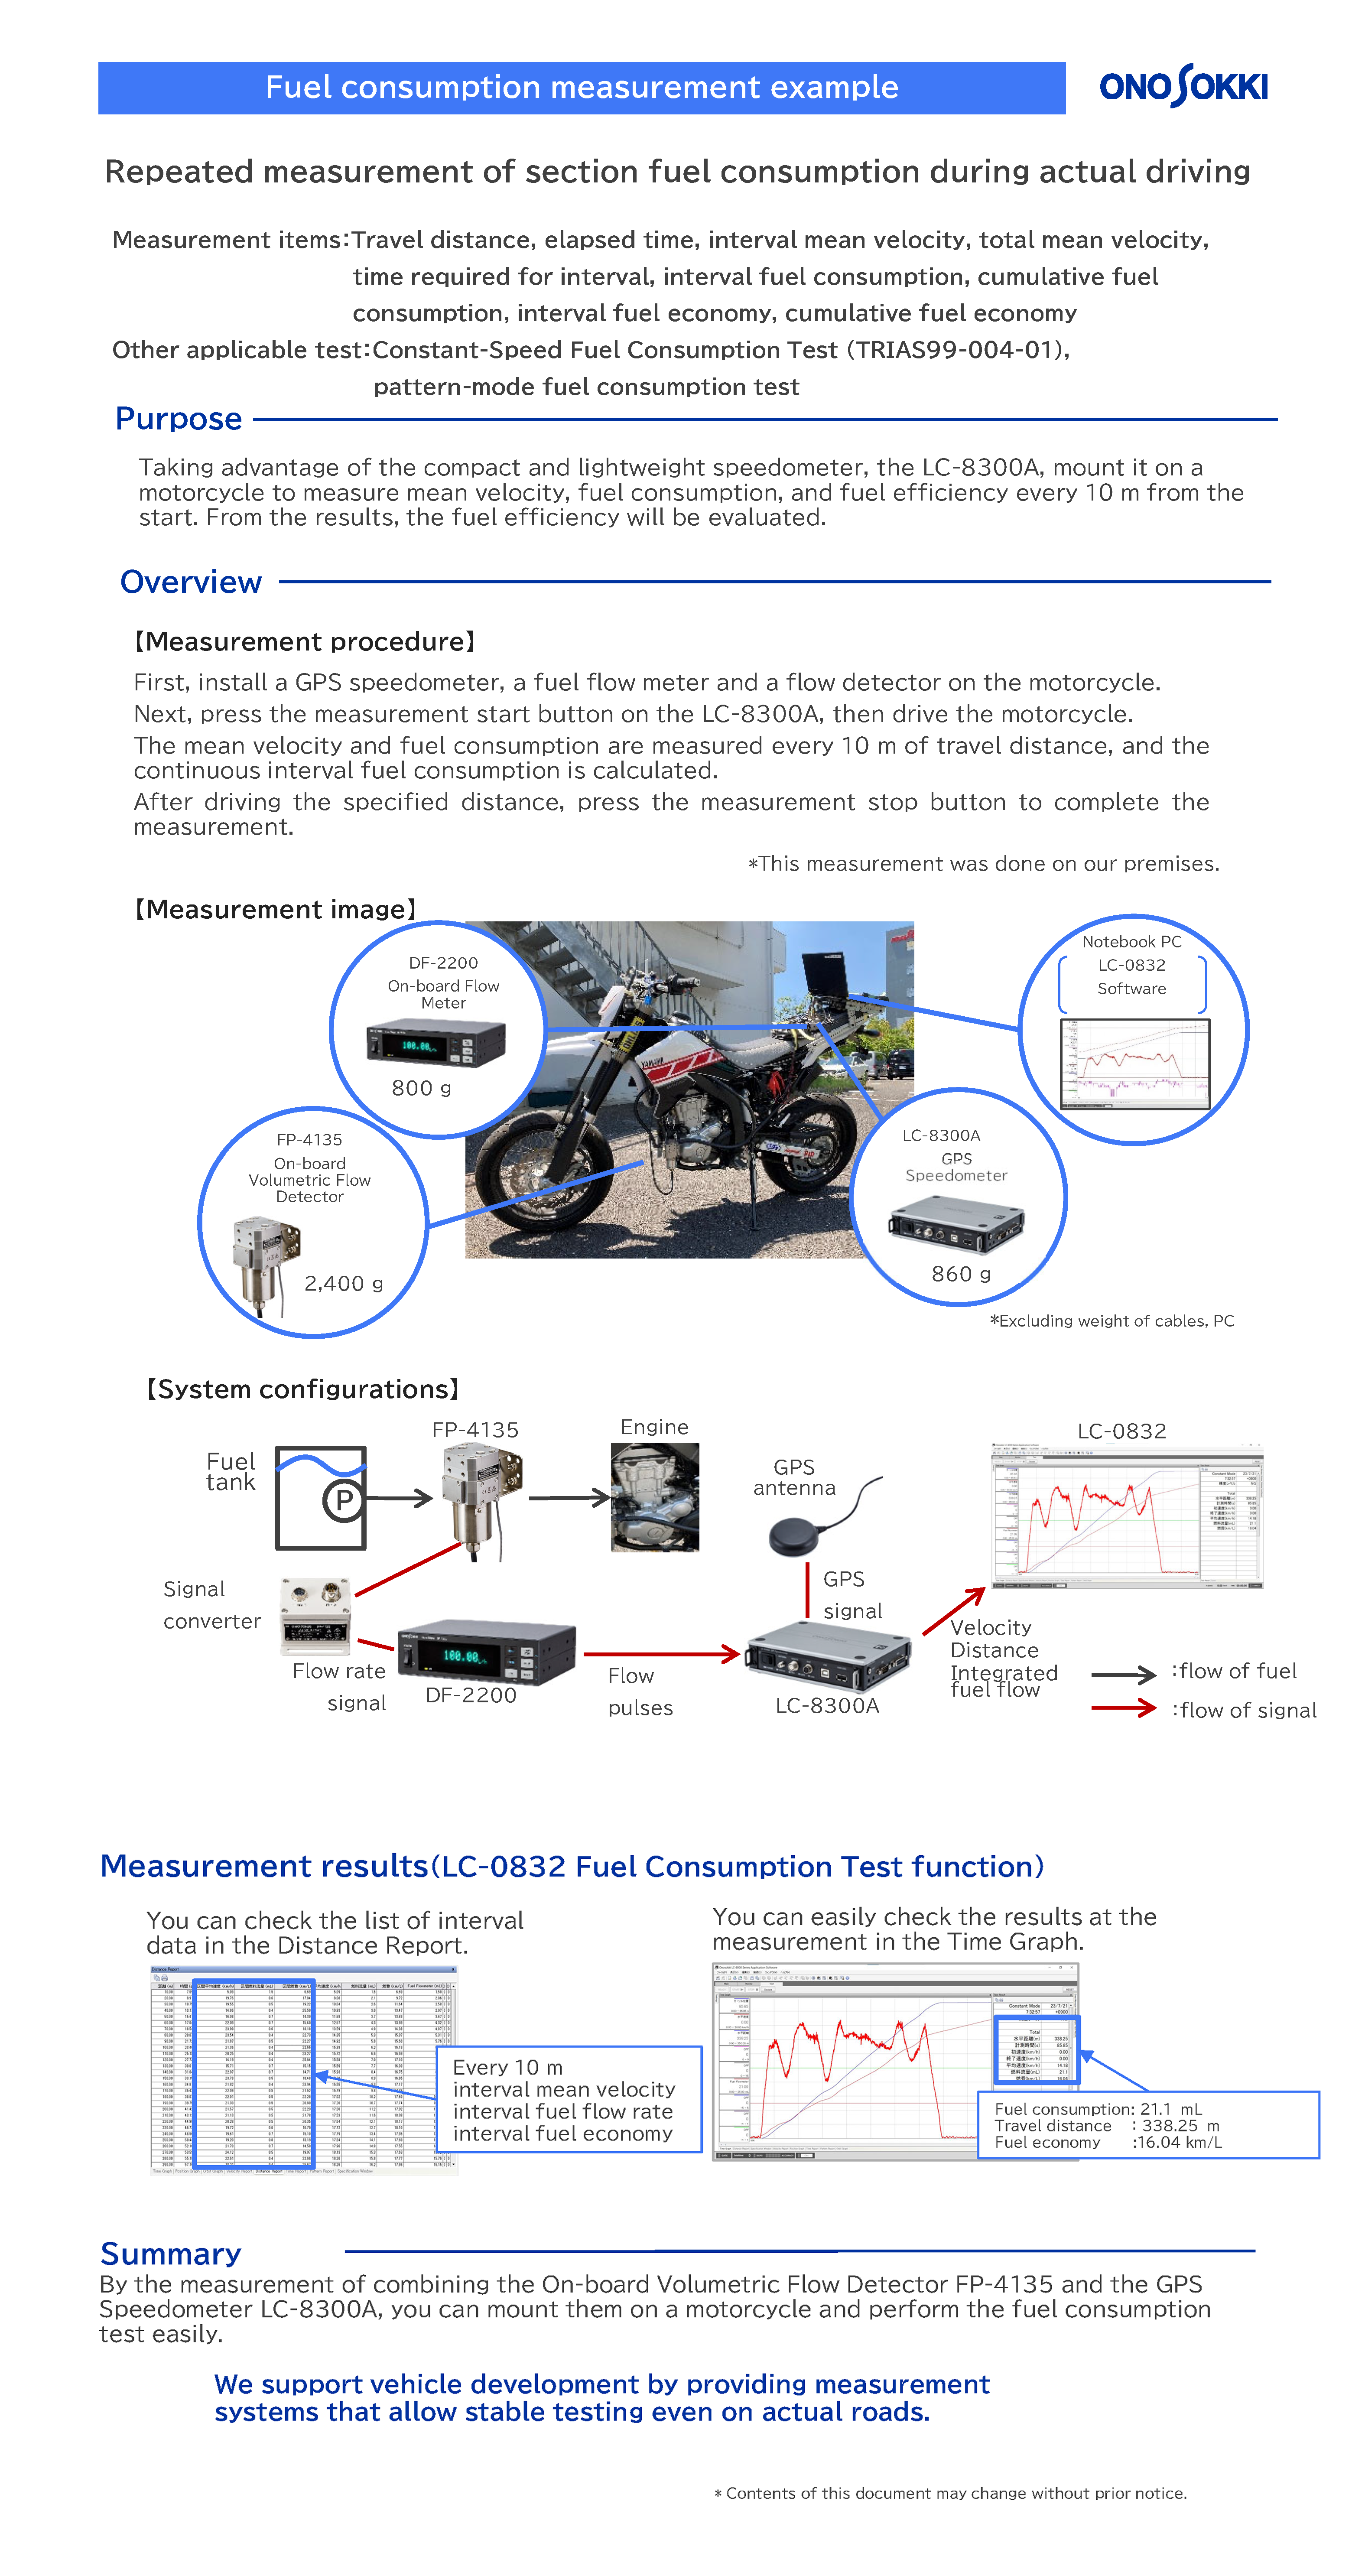 Taking advantage of the compact and lightweight speedometer, the LC-8300A, mount it on a
motorcycle to measure mean velocity, fuel consumption, and fuel efficiency every 10 m from the
start. From the results, the fuel efficiency will be evaluated.